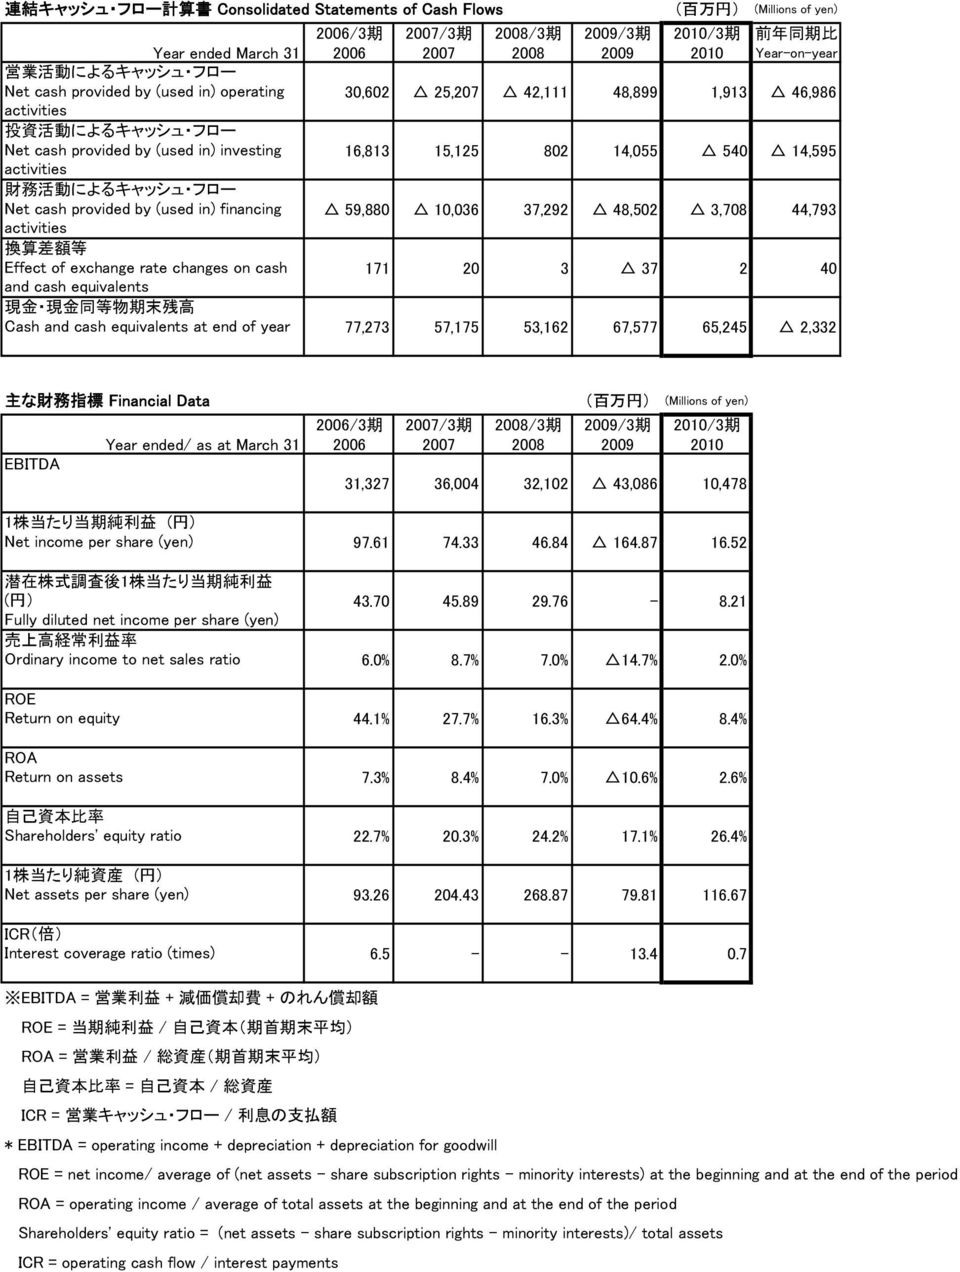 14,055 540 14,595 activities 財 務 活 動 によるキャッシュ フロー Net cash provided by (used in) financing 59,880 10,036 37,292 48,502 3,708 44,793 activities 換 算 差 額 等 Effect of exchange rate changes on cash 171 20